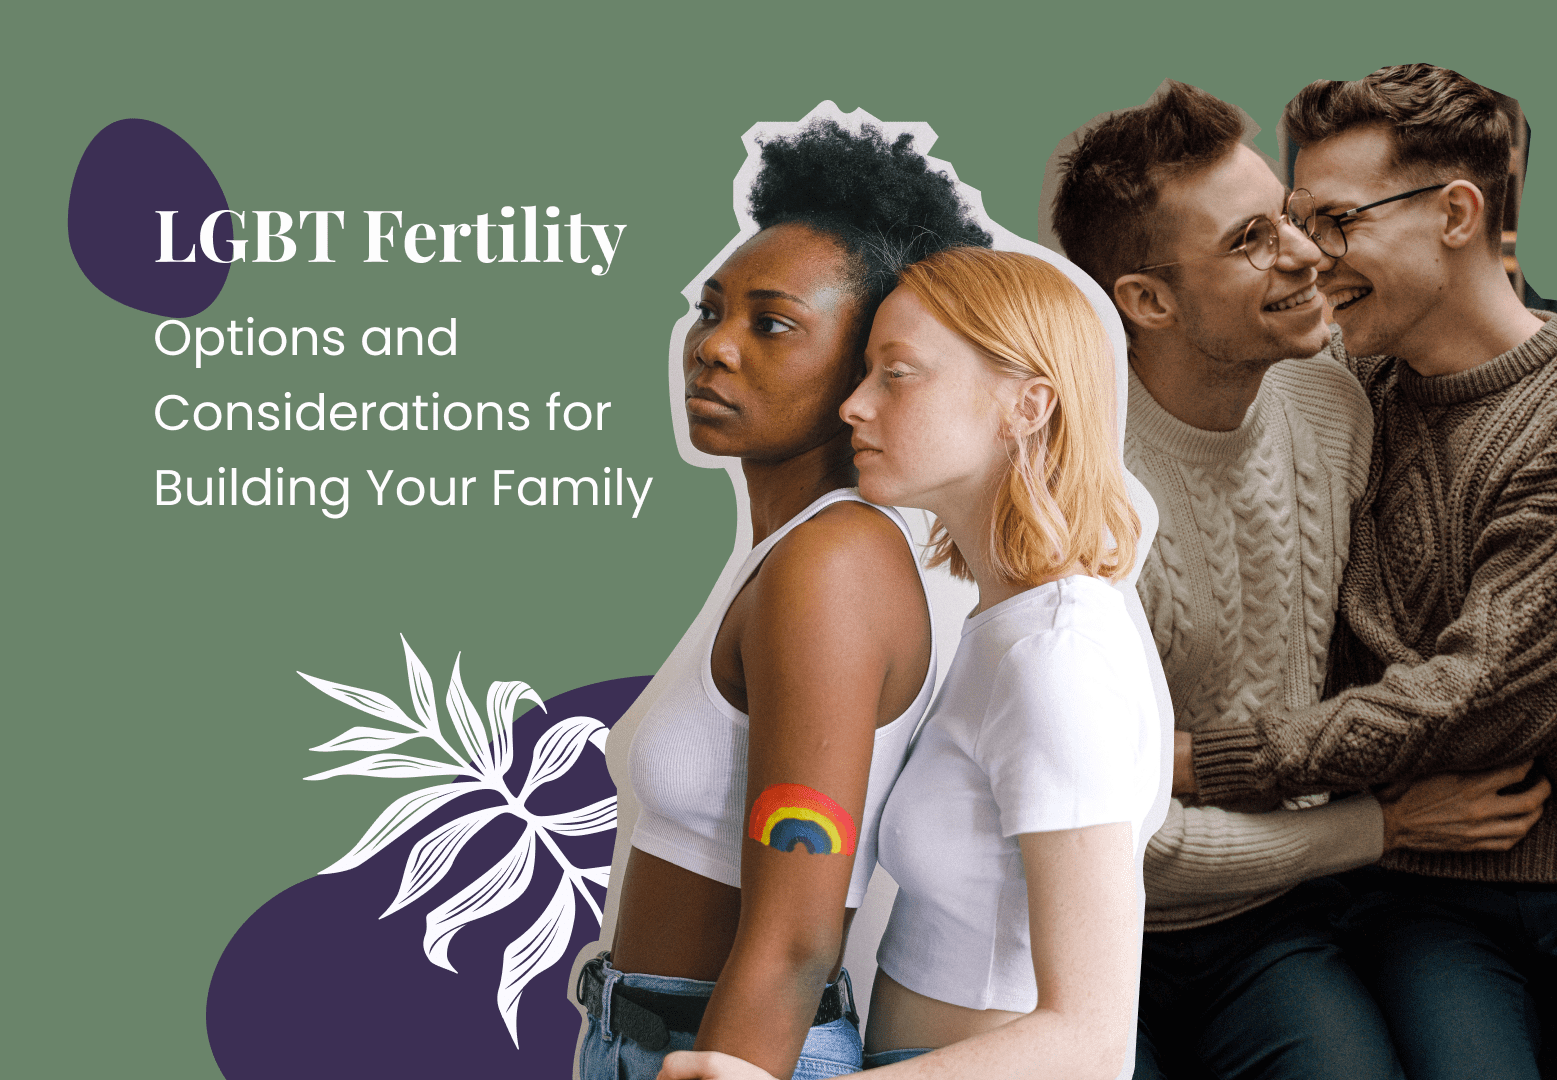 LGBTQ+ Fertility: Options and Considerations for Building Your Family [Infographic]